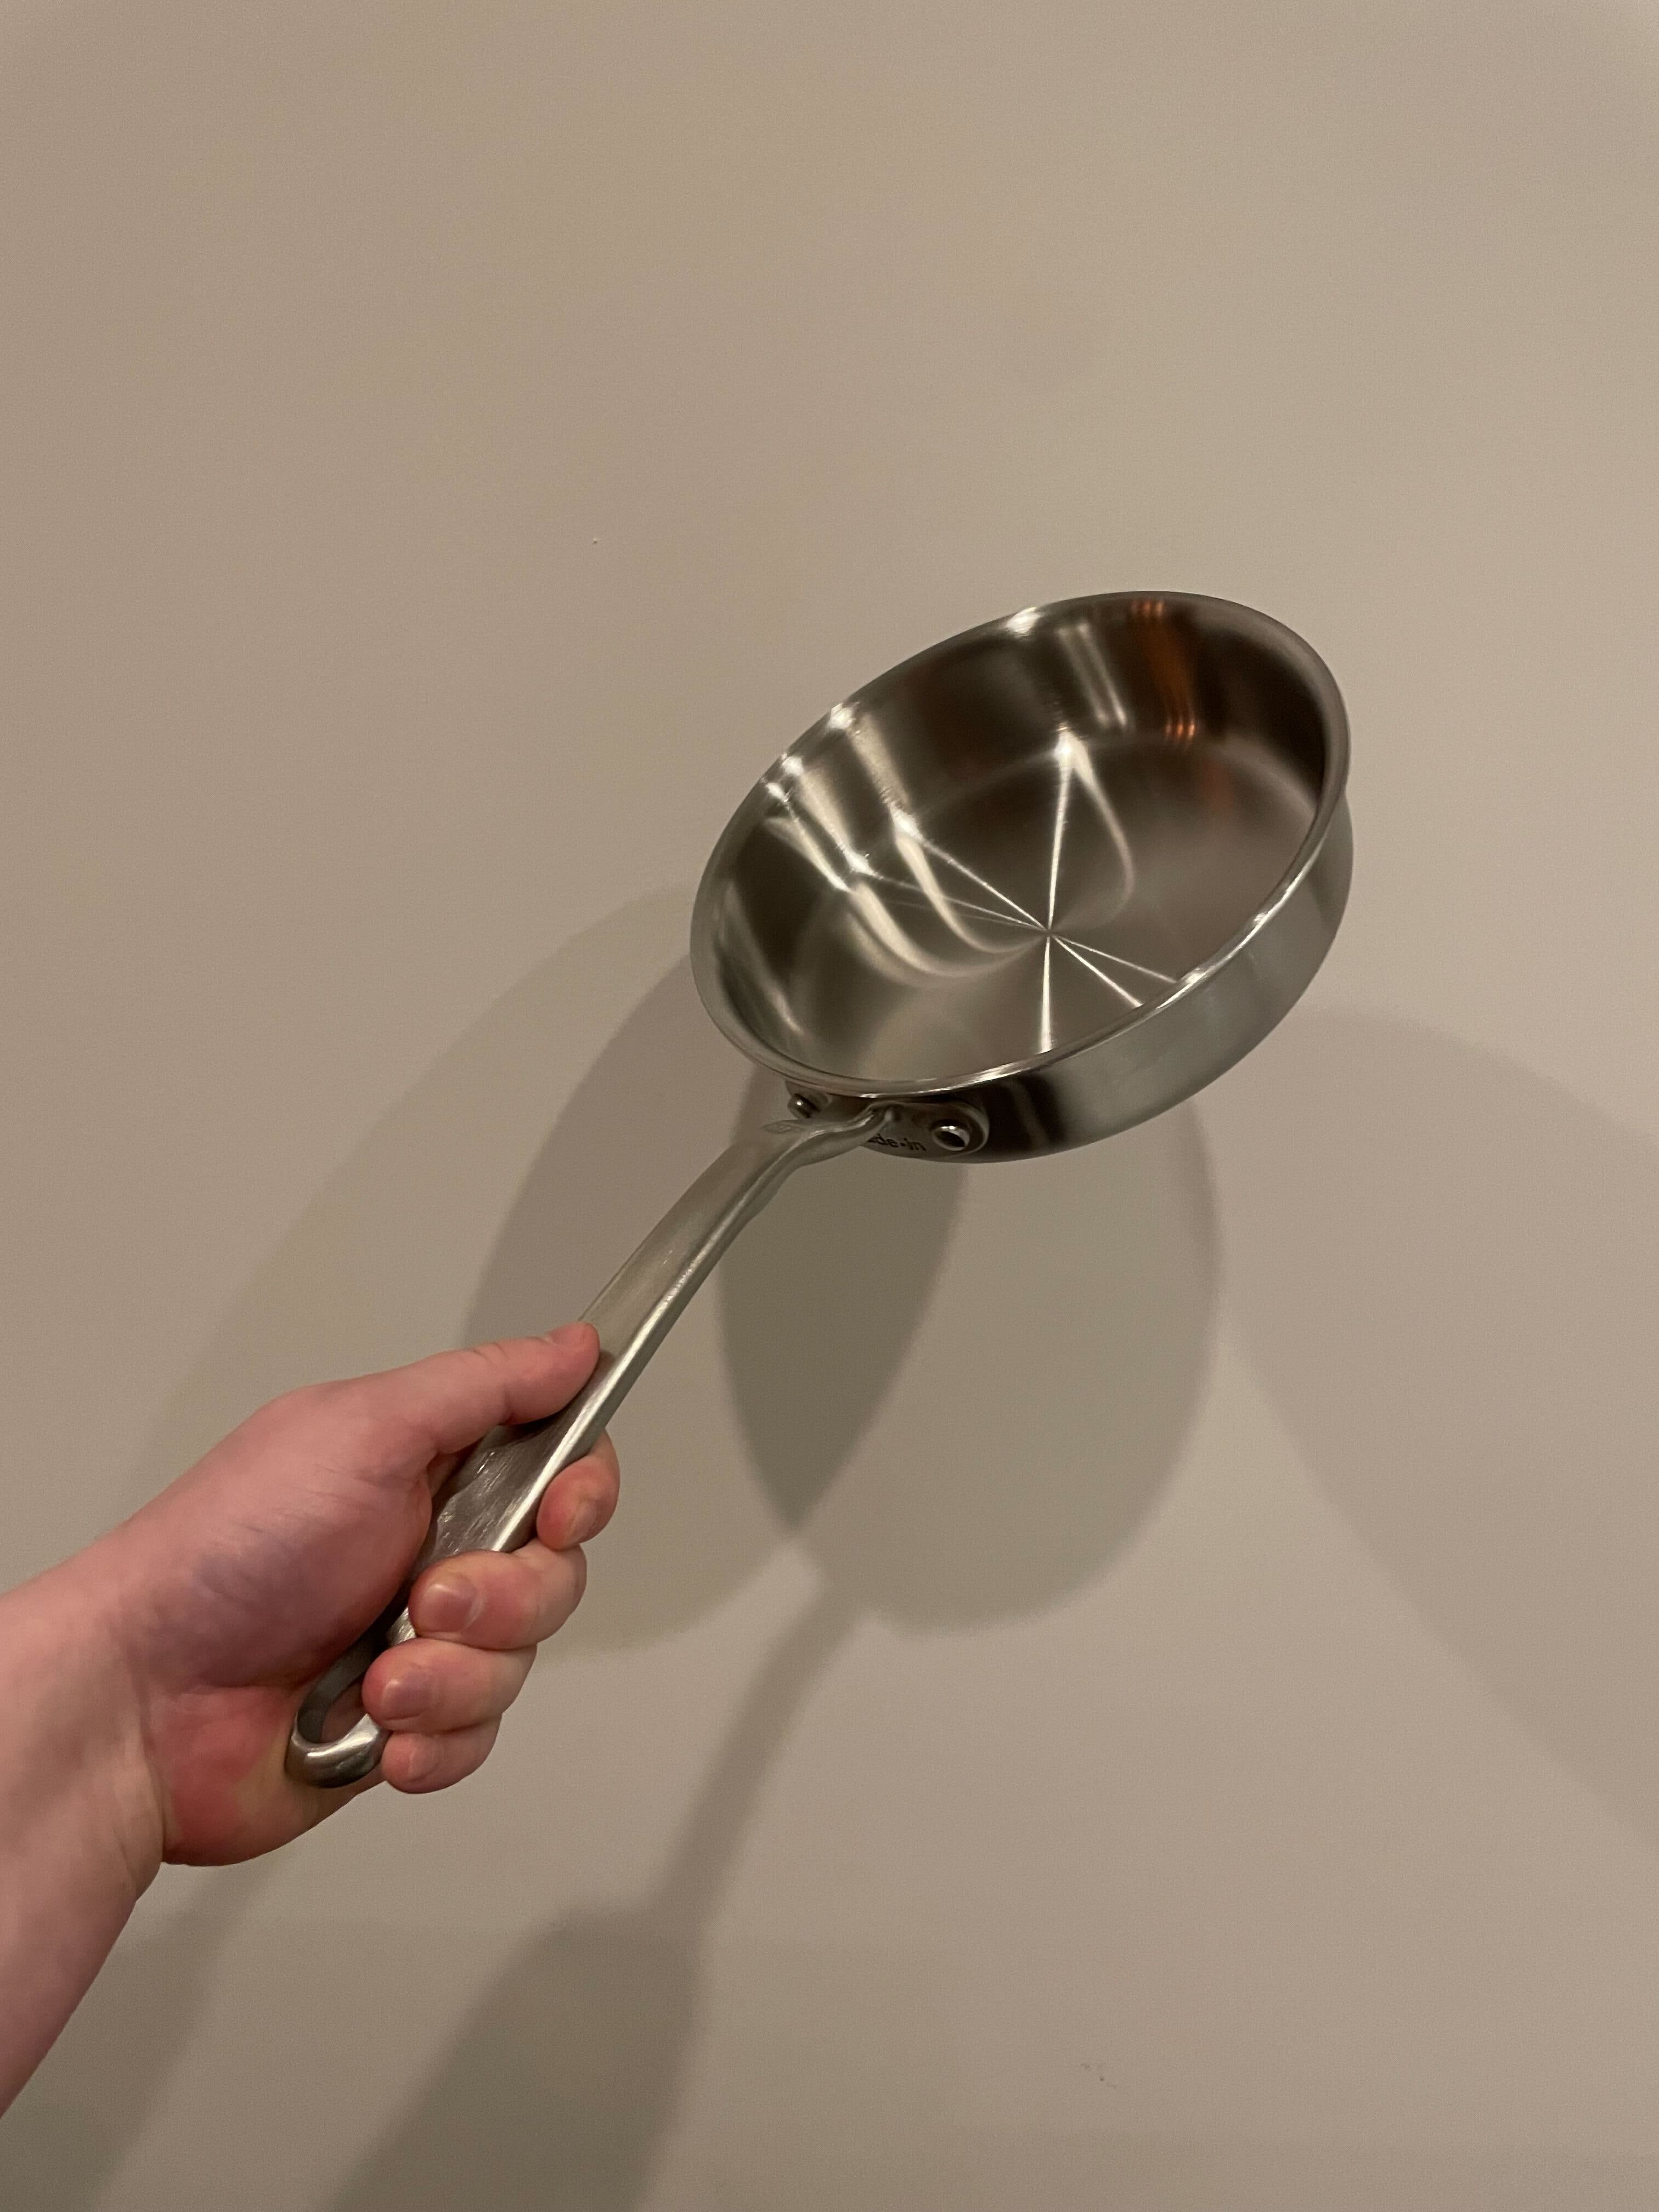 Made In's New Mini Saucepan Is the Perfect Addition to My Tiny